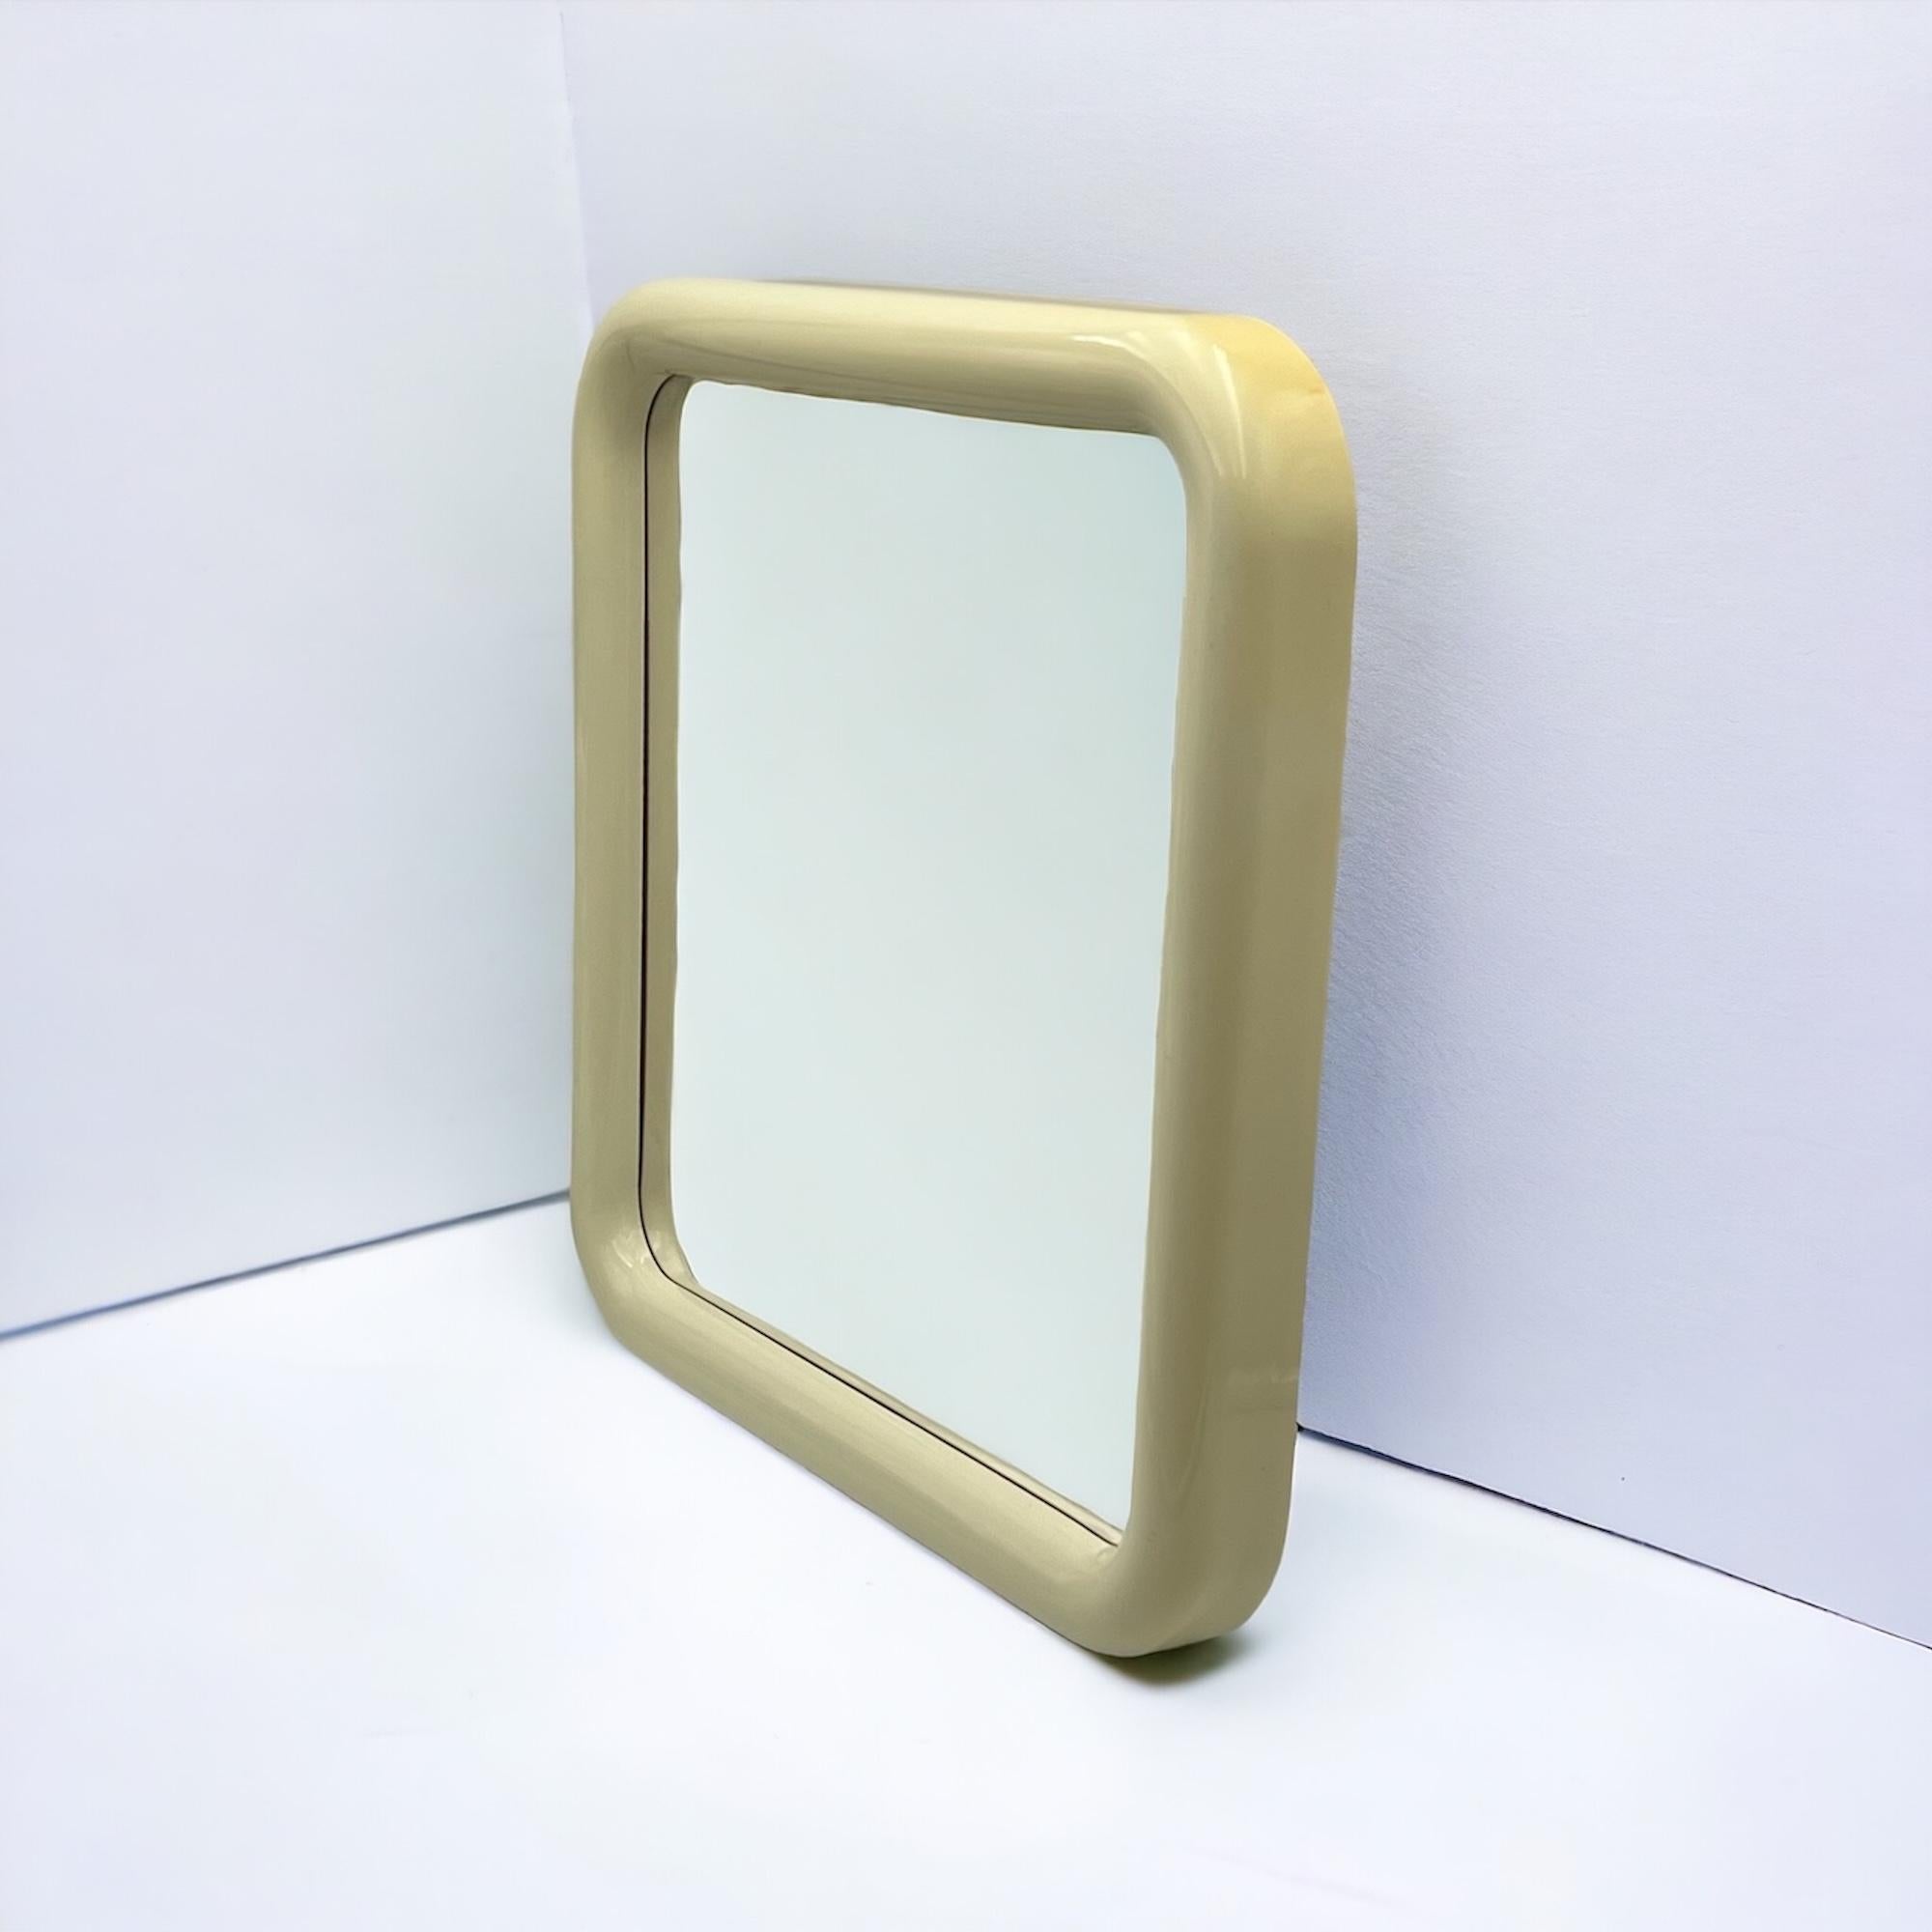 Mid-20th Century 1960s Italian Space Age Wall Mirror - Chic Design, Thick Borders, Beige Hue.